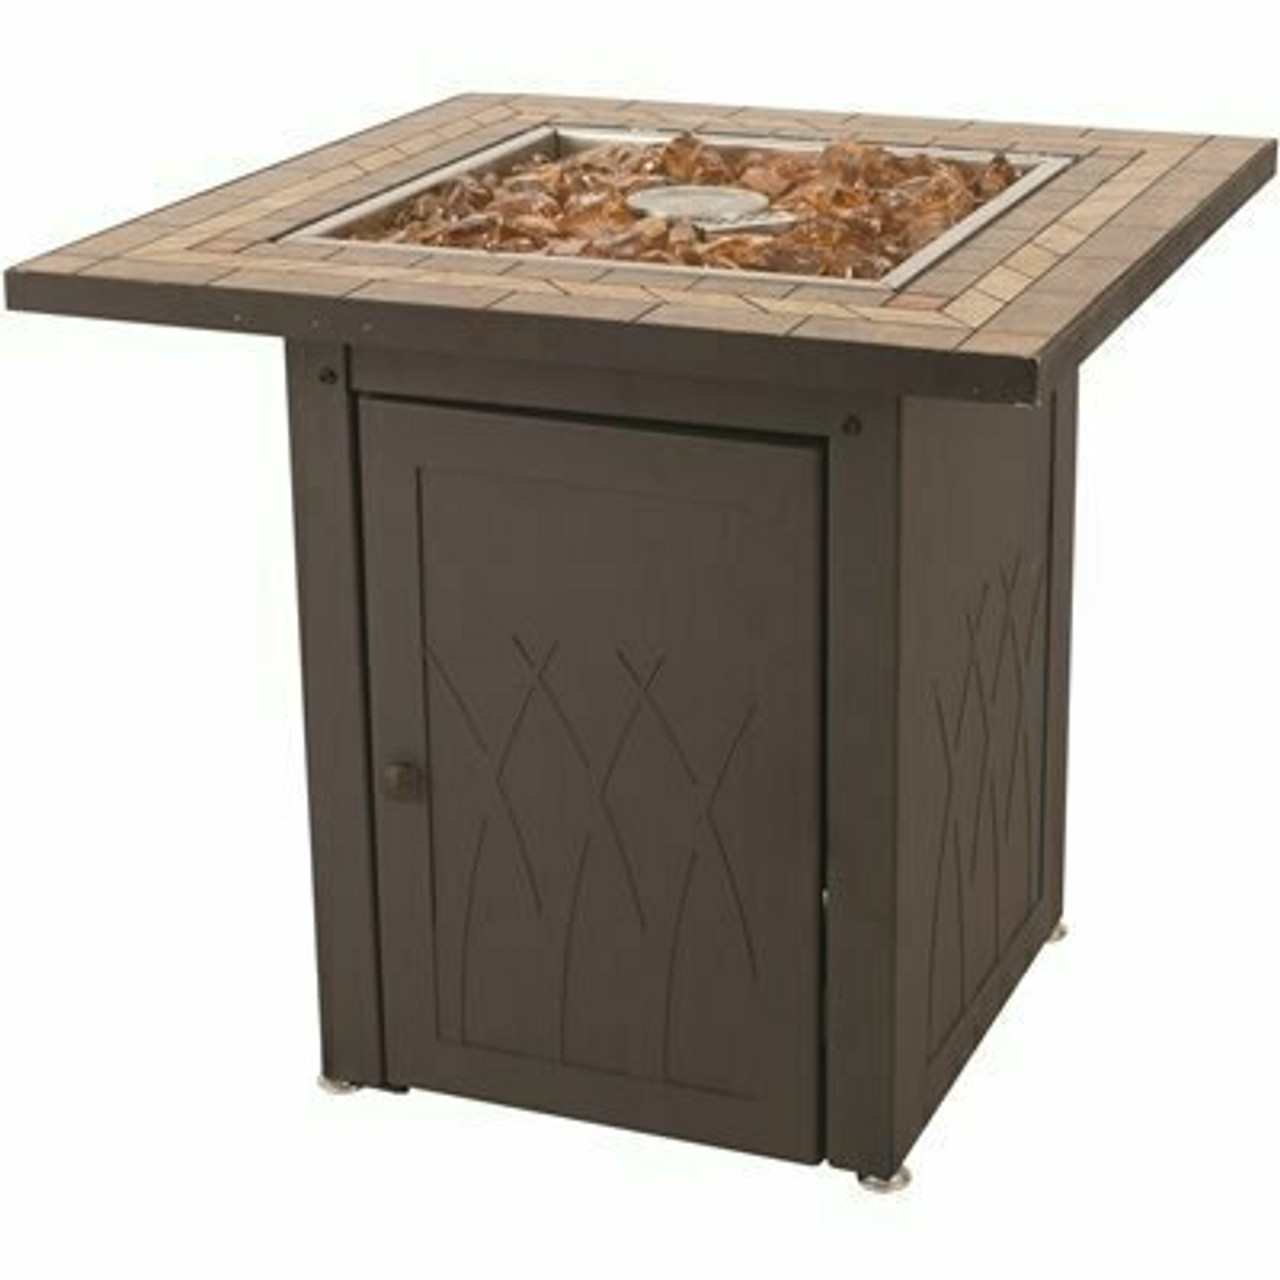 Pleasant Hearth Atlantis 28 In. X 26 In. Square Steel Propane Gas Fire Pit Table In Black With Glass Fire Rocks